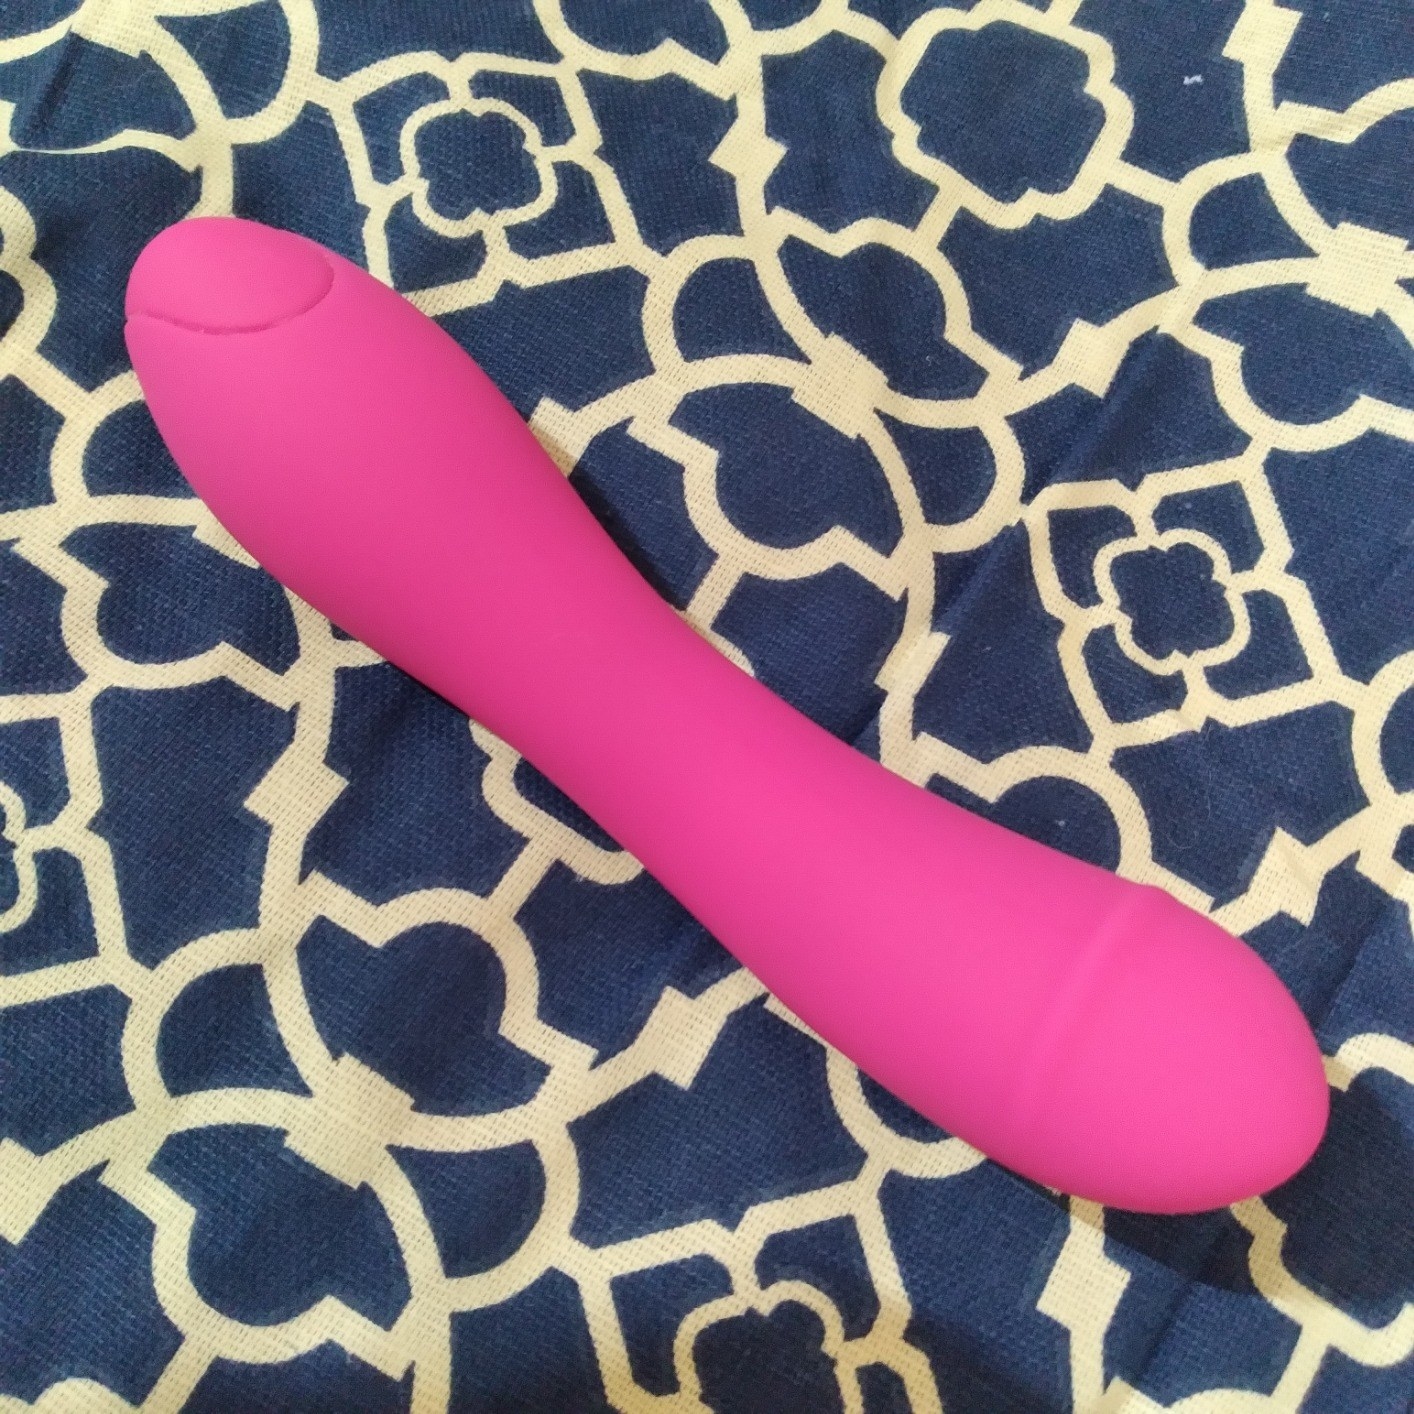 Pink vibrator on bed